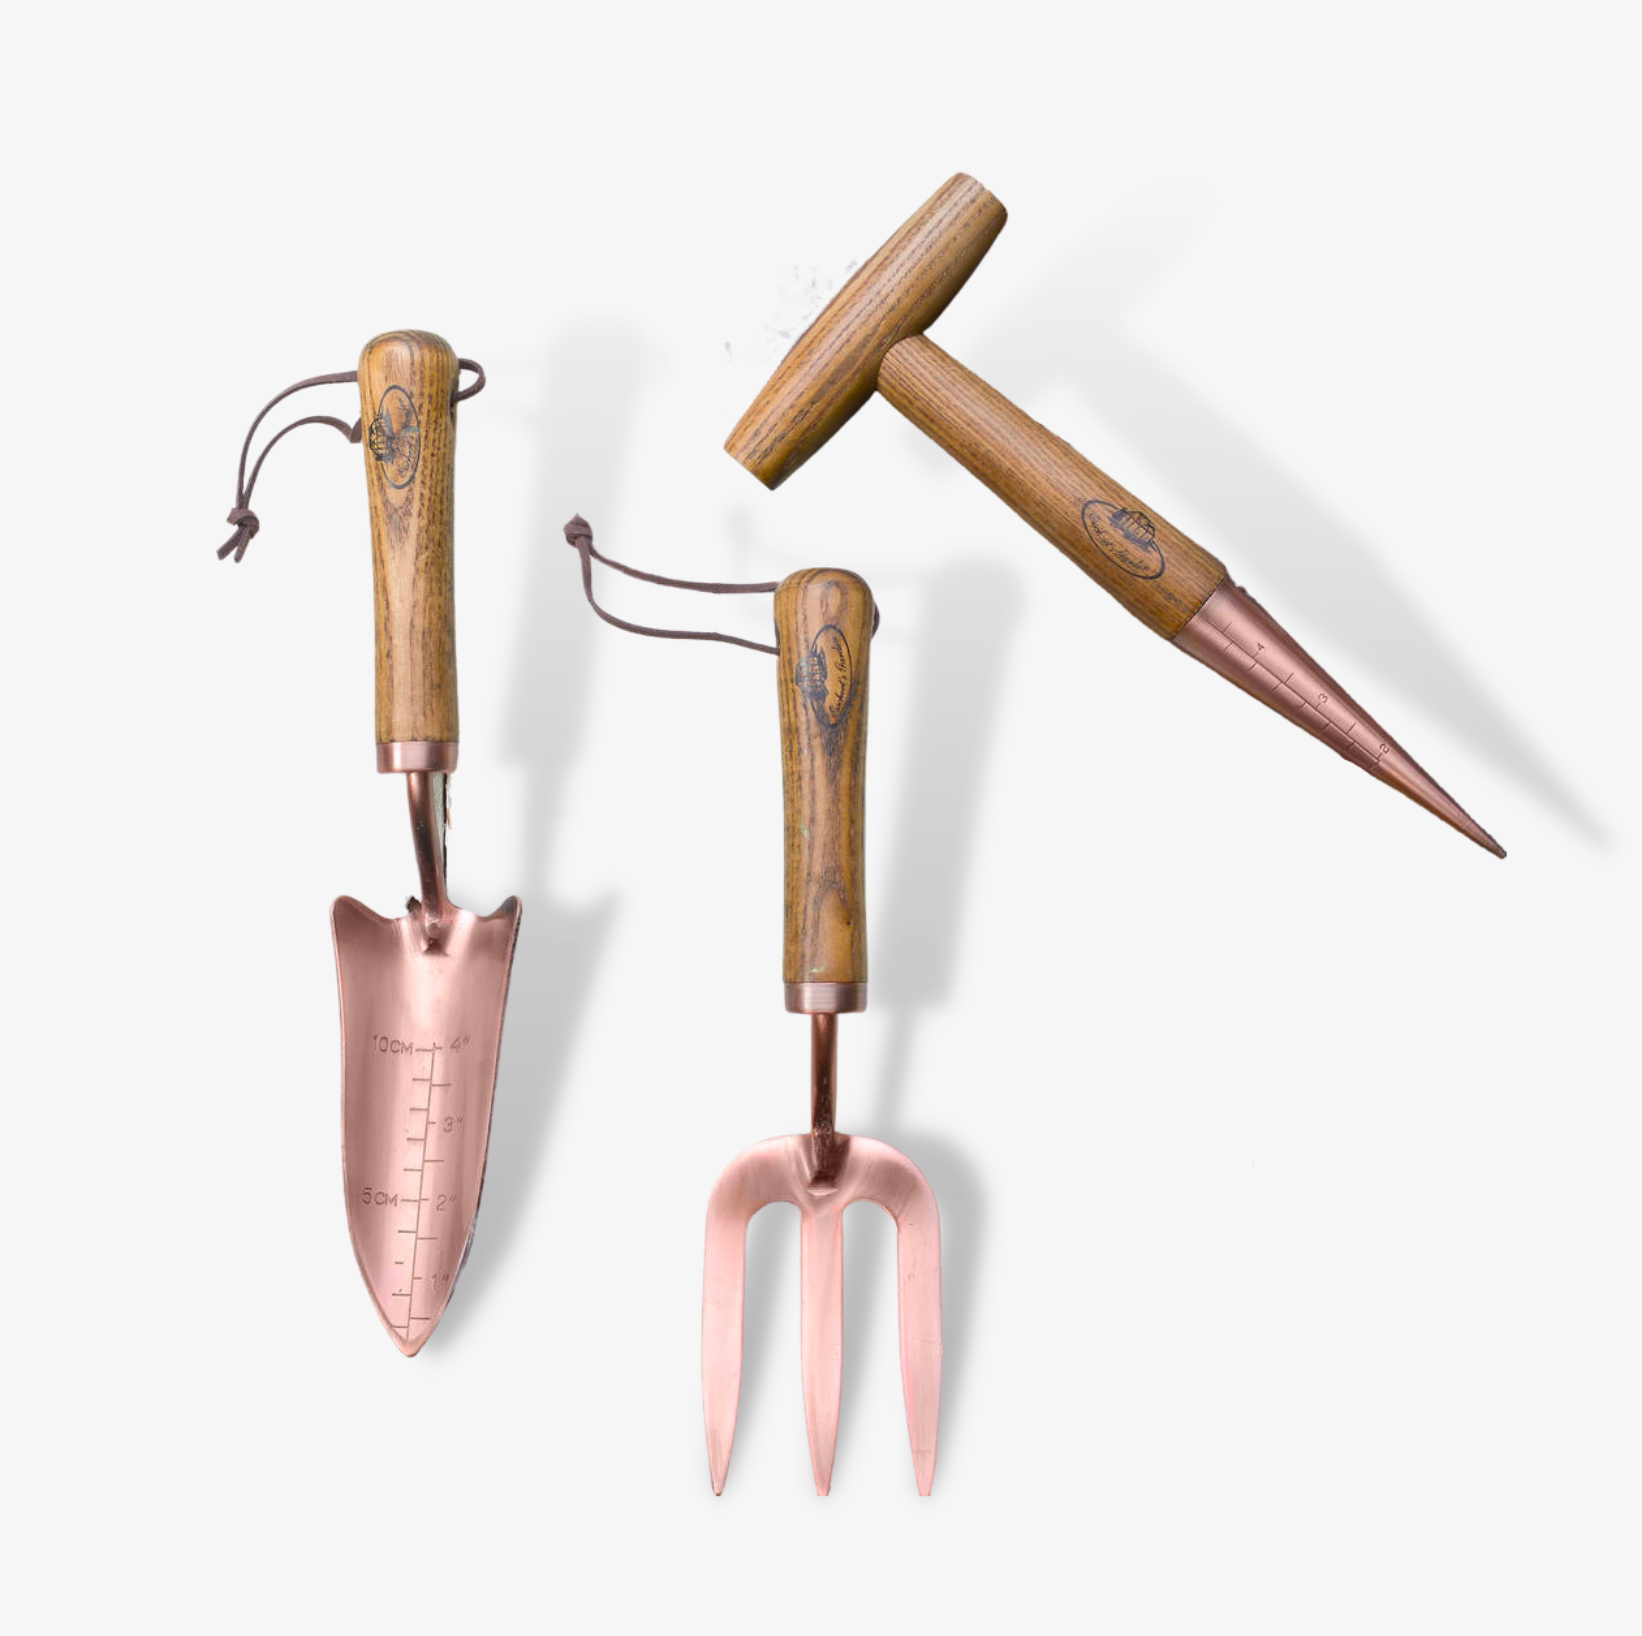 The Letteroom Wood and Copper Garden Tools